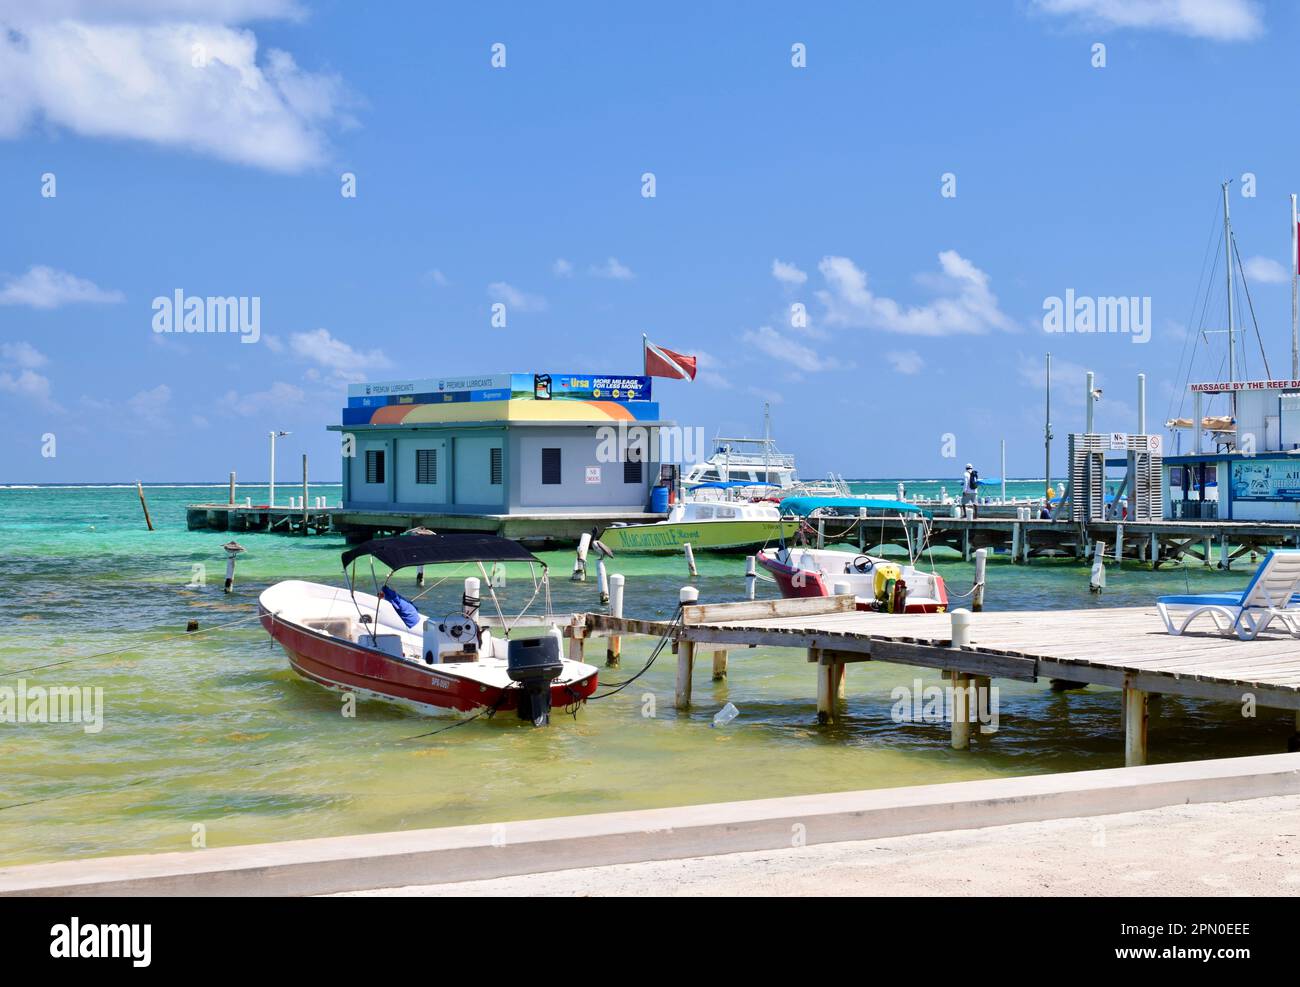 Docked boats over clear water on a sunny day in San Pedro, Ambergris Caye, Belize, Caribbean/Central America. Stock Photo